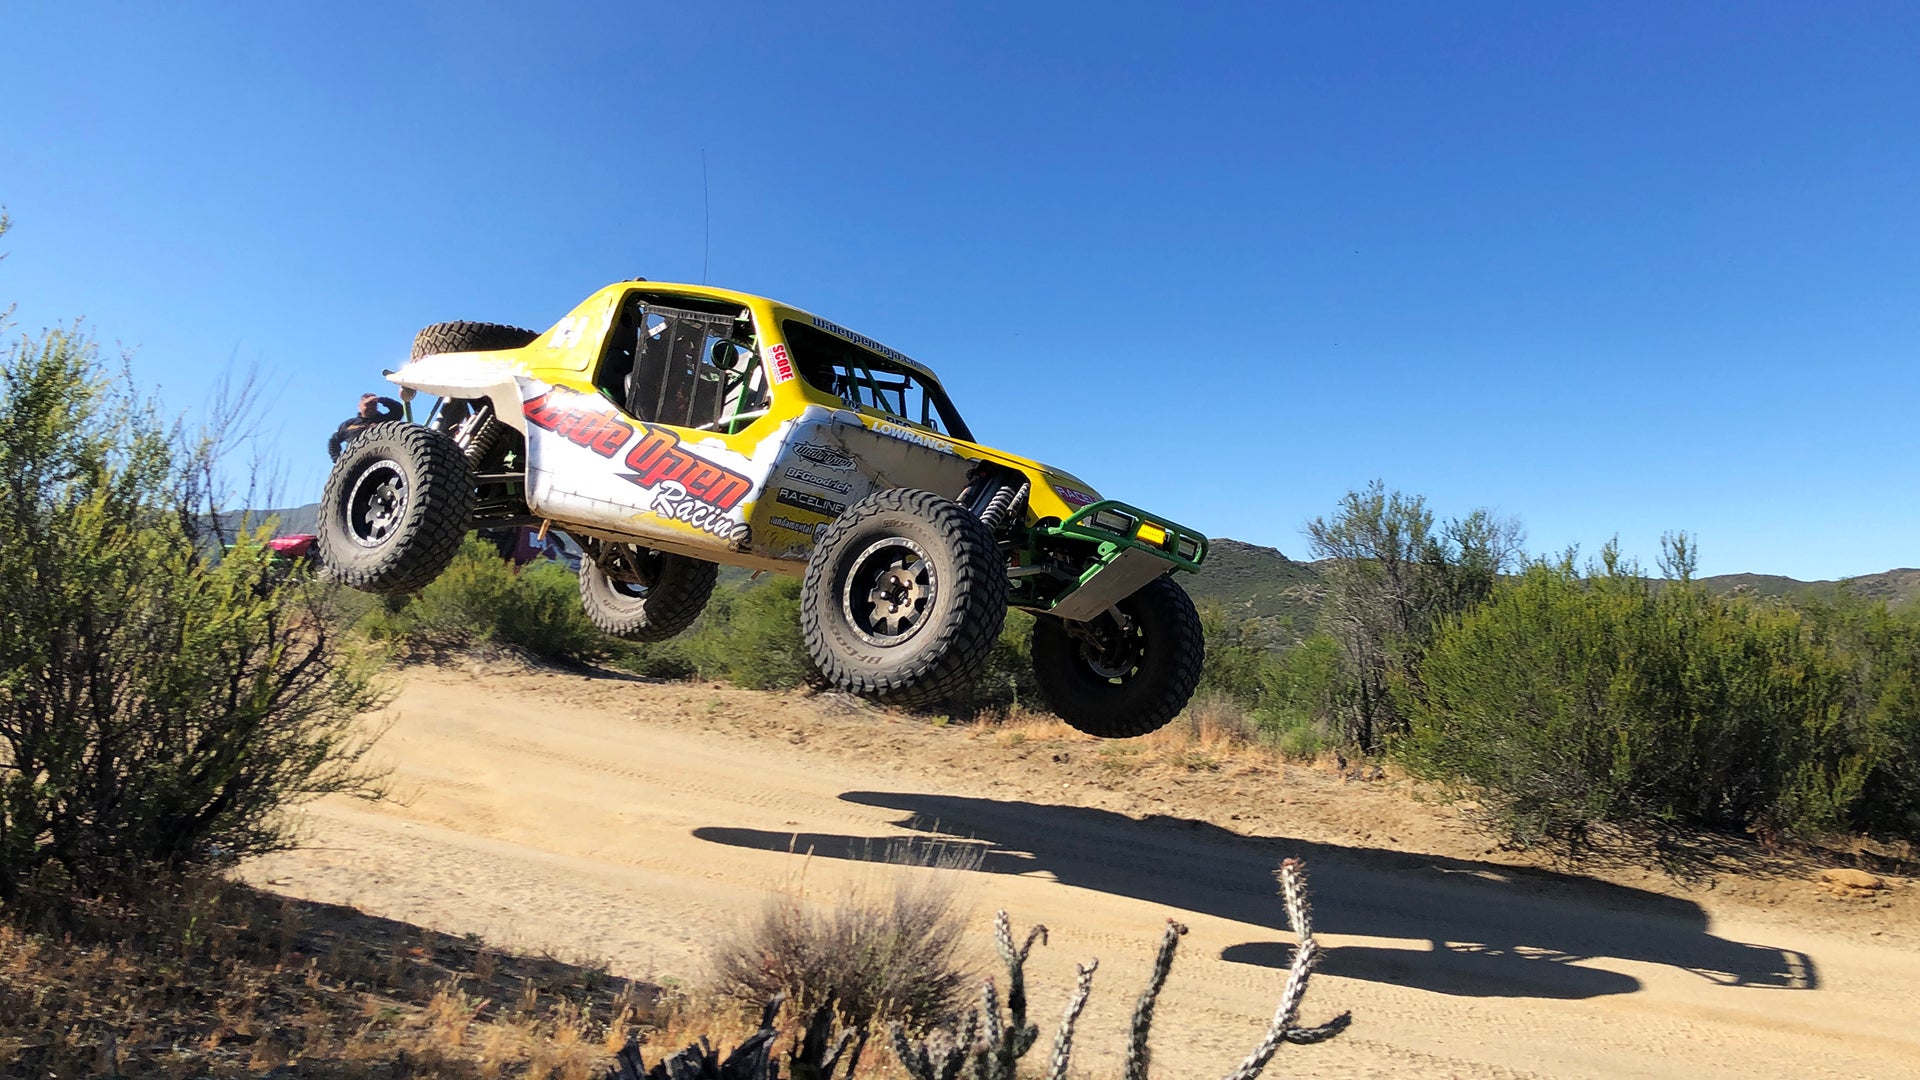 Tearing Through Mexico In Someone Else’s Baja Challenge Buggy Is the Only Way to Travel